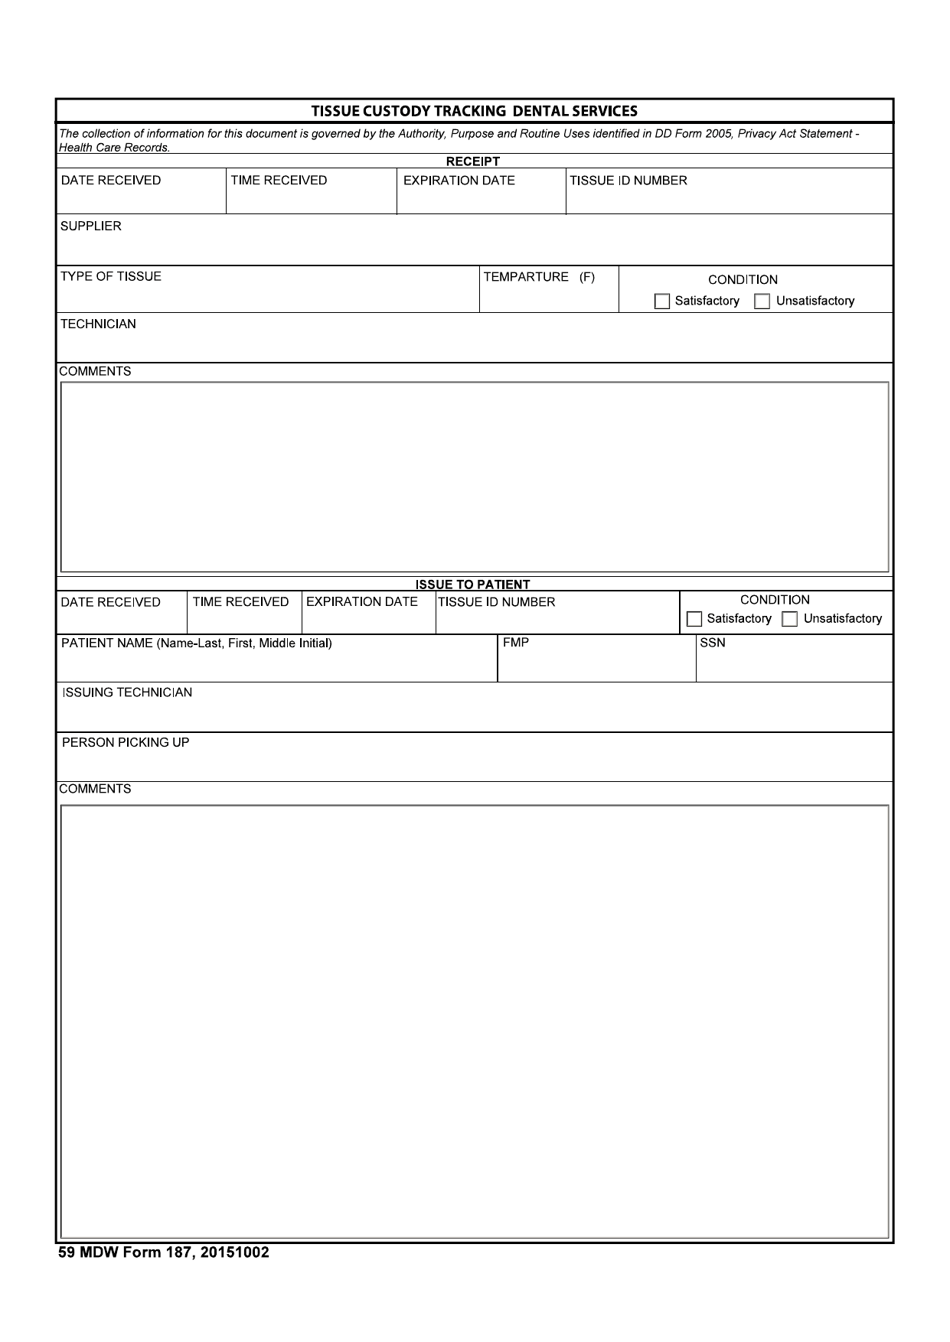 59 MDW Form 187 Tissue Custody Tracking Dental Services, Page 1